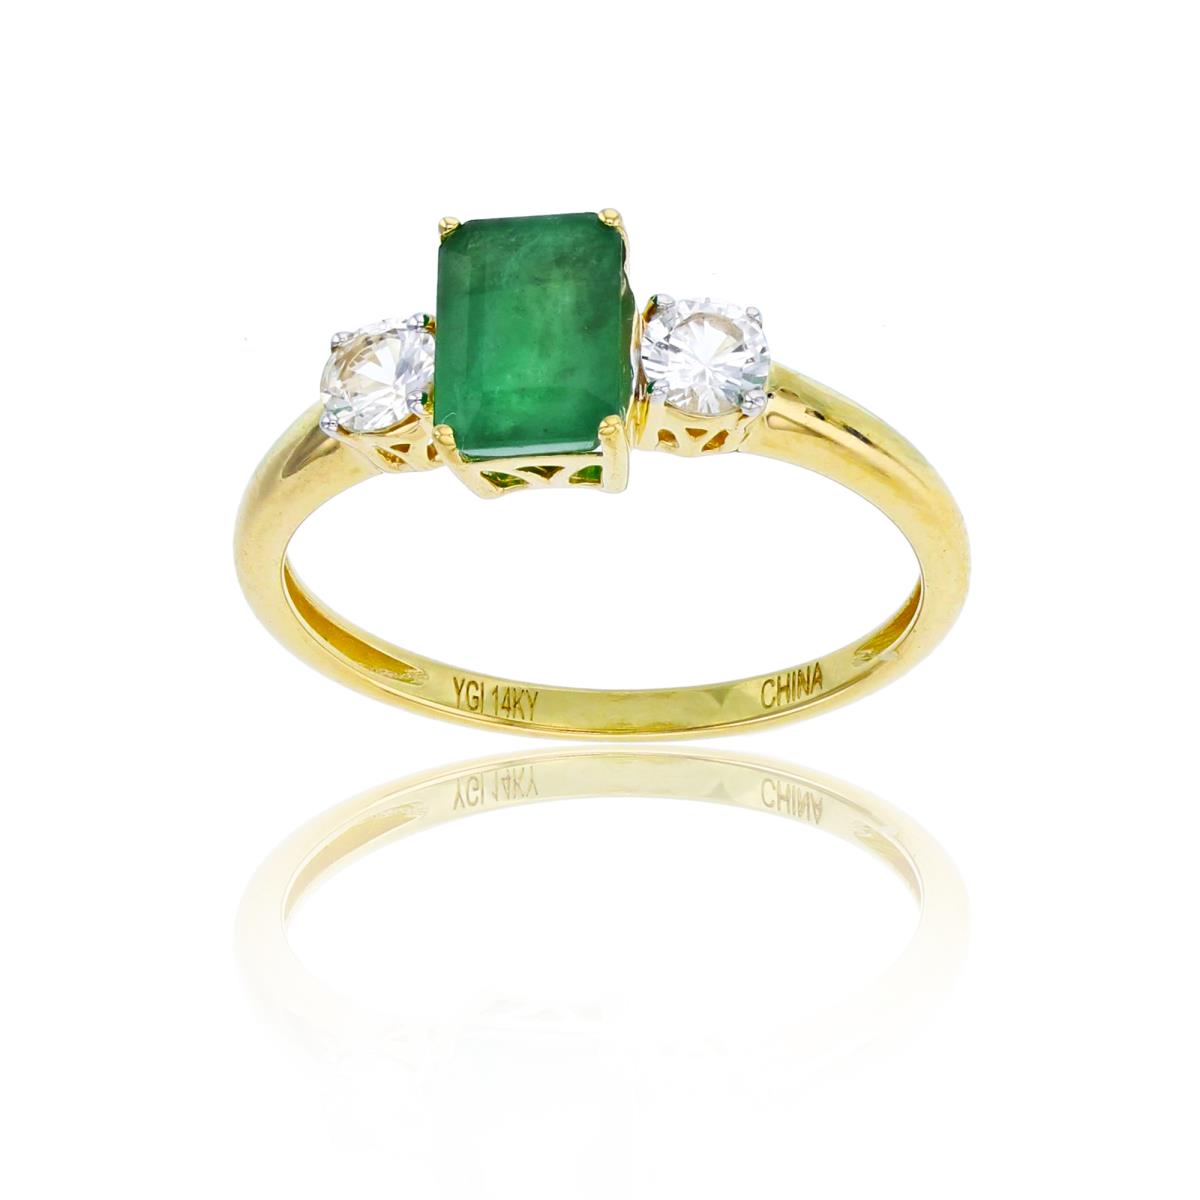 14K Yellow Gold 7x5mm Octagon Created Emerald & 3.5mm Rnd White Topaz on Sides Ring